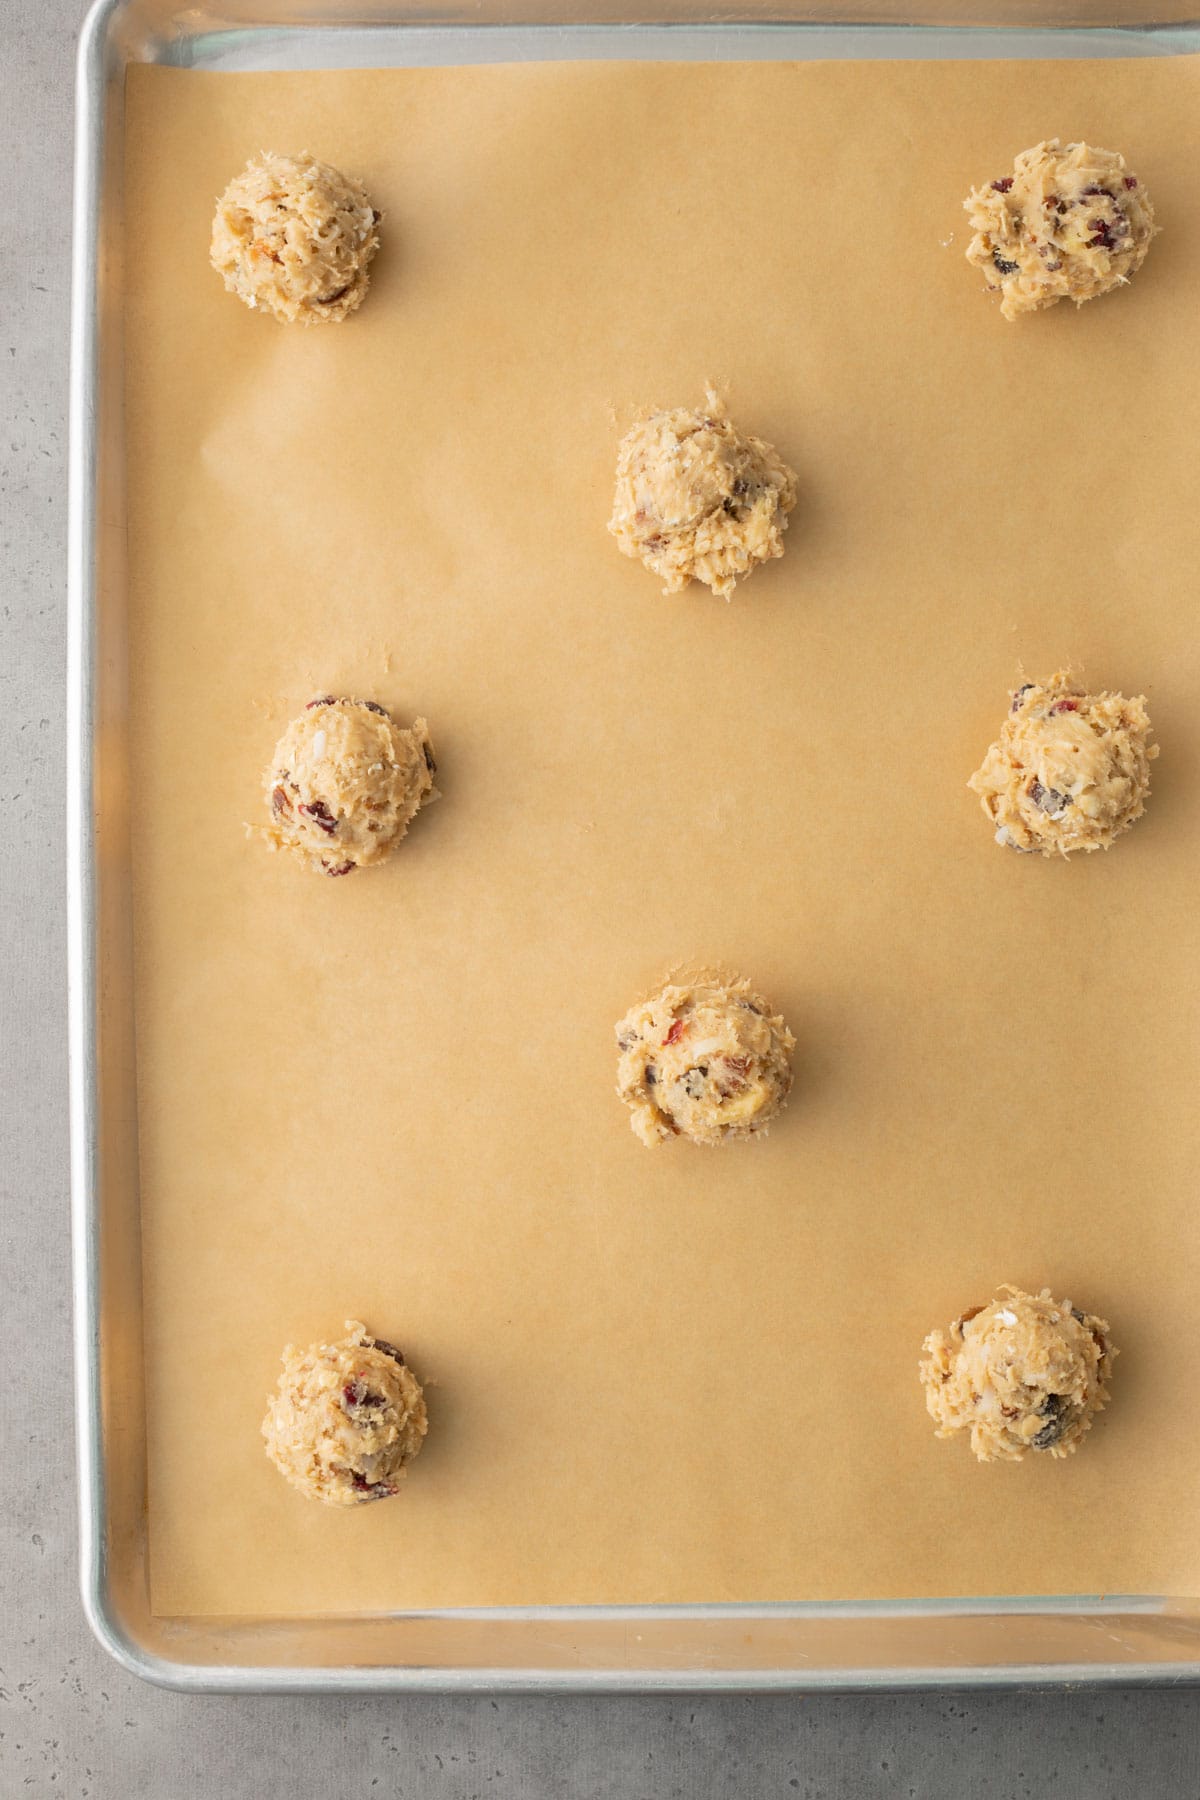 Breakfast Cookies dough balls on parchment lined baking sheet